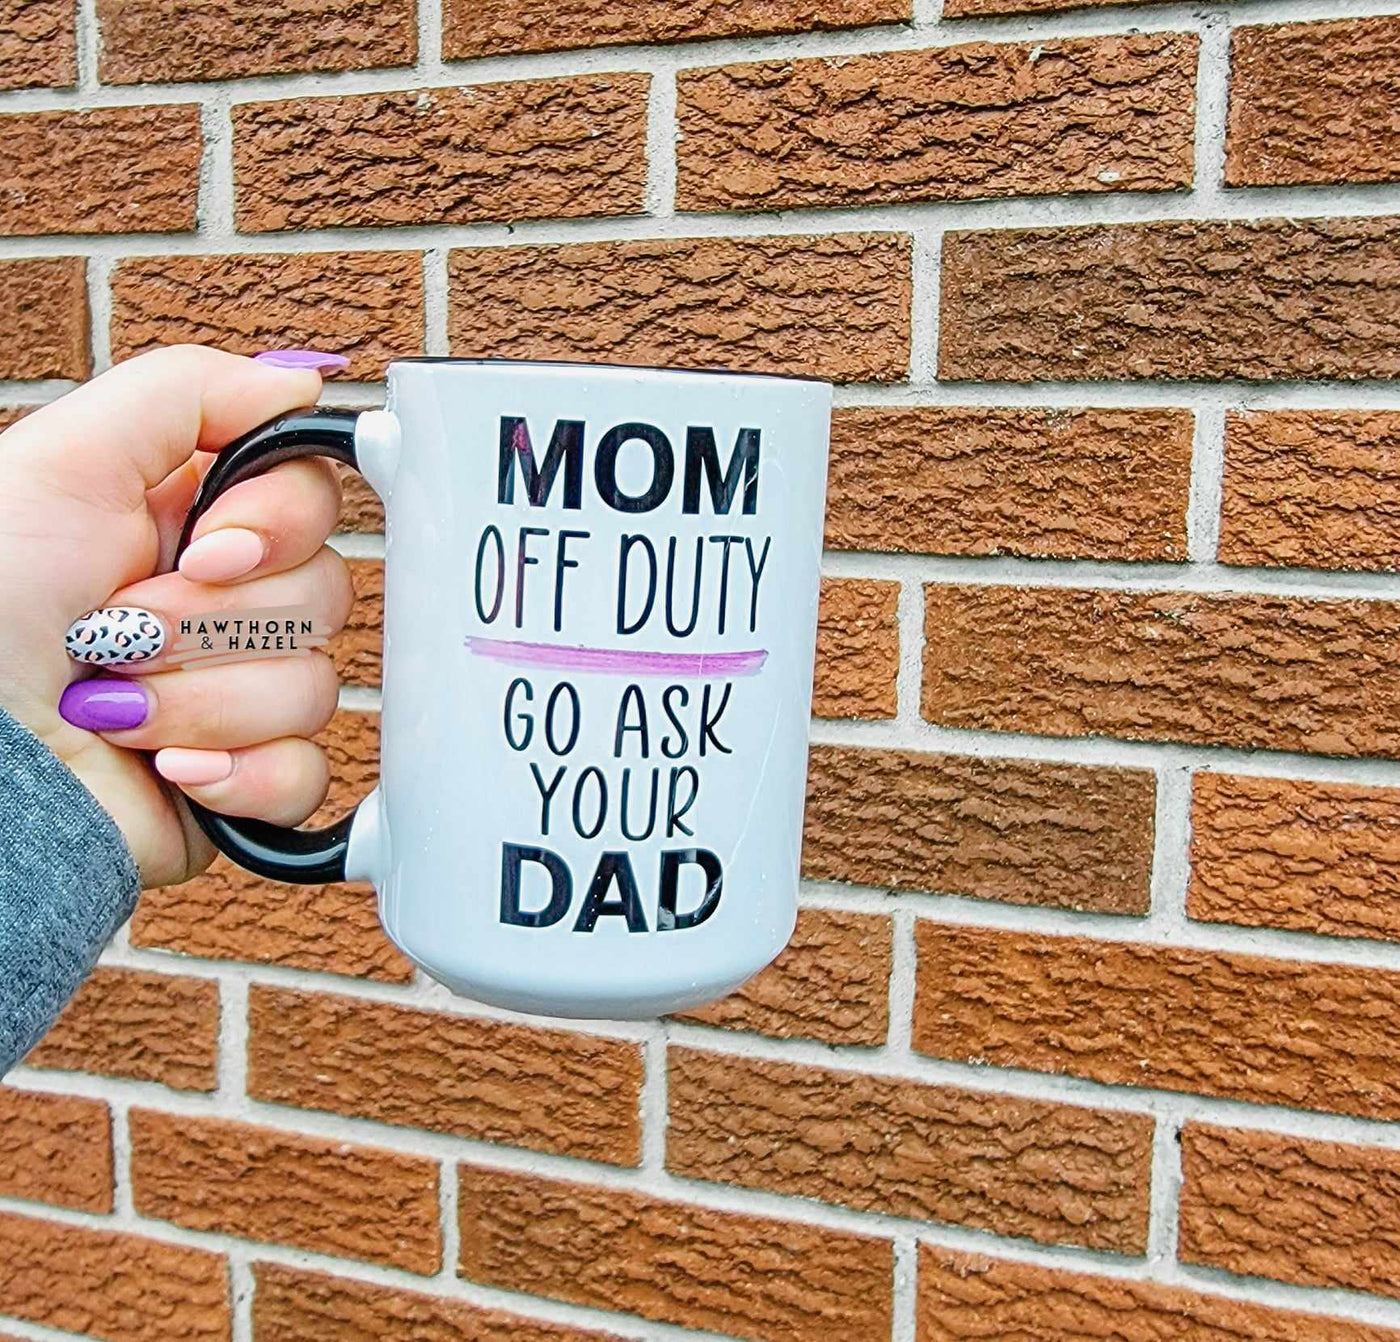 Mom off duty - Go ask your Dad